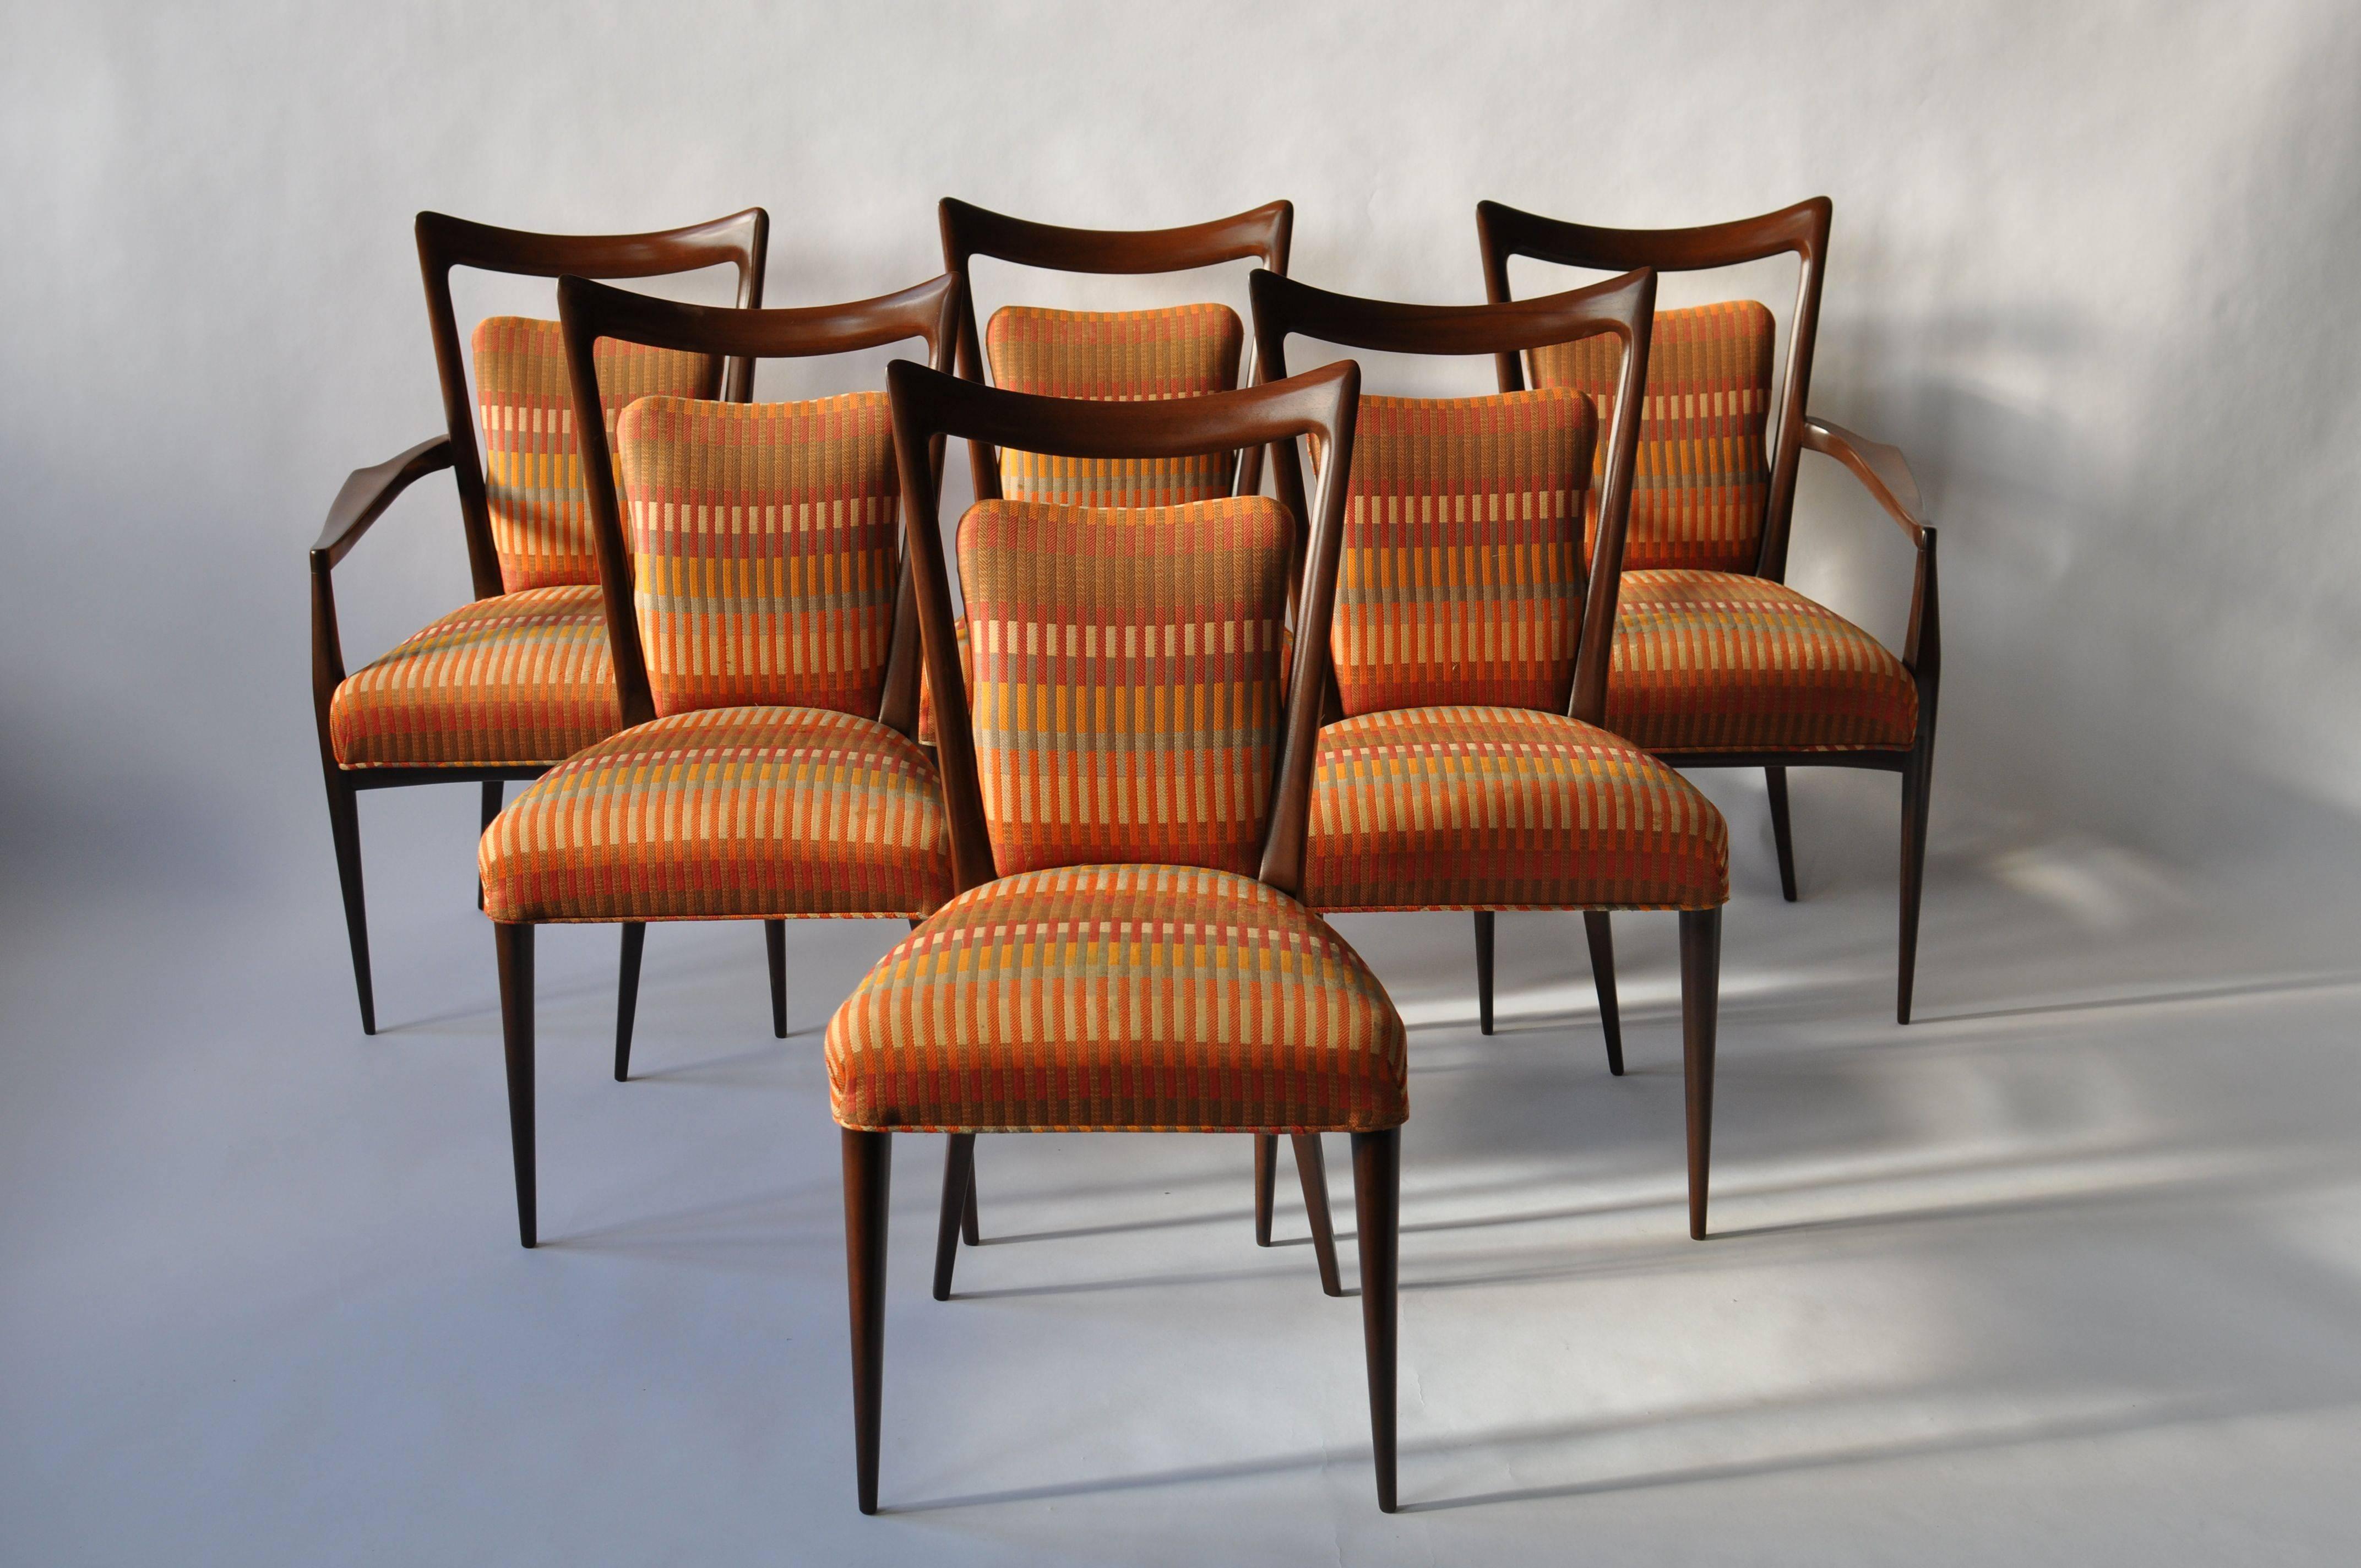 Set of six Erno Fabry, dining chairs. Two armchairs and four side chairs.
Armchairs measure 23.5 wide.